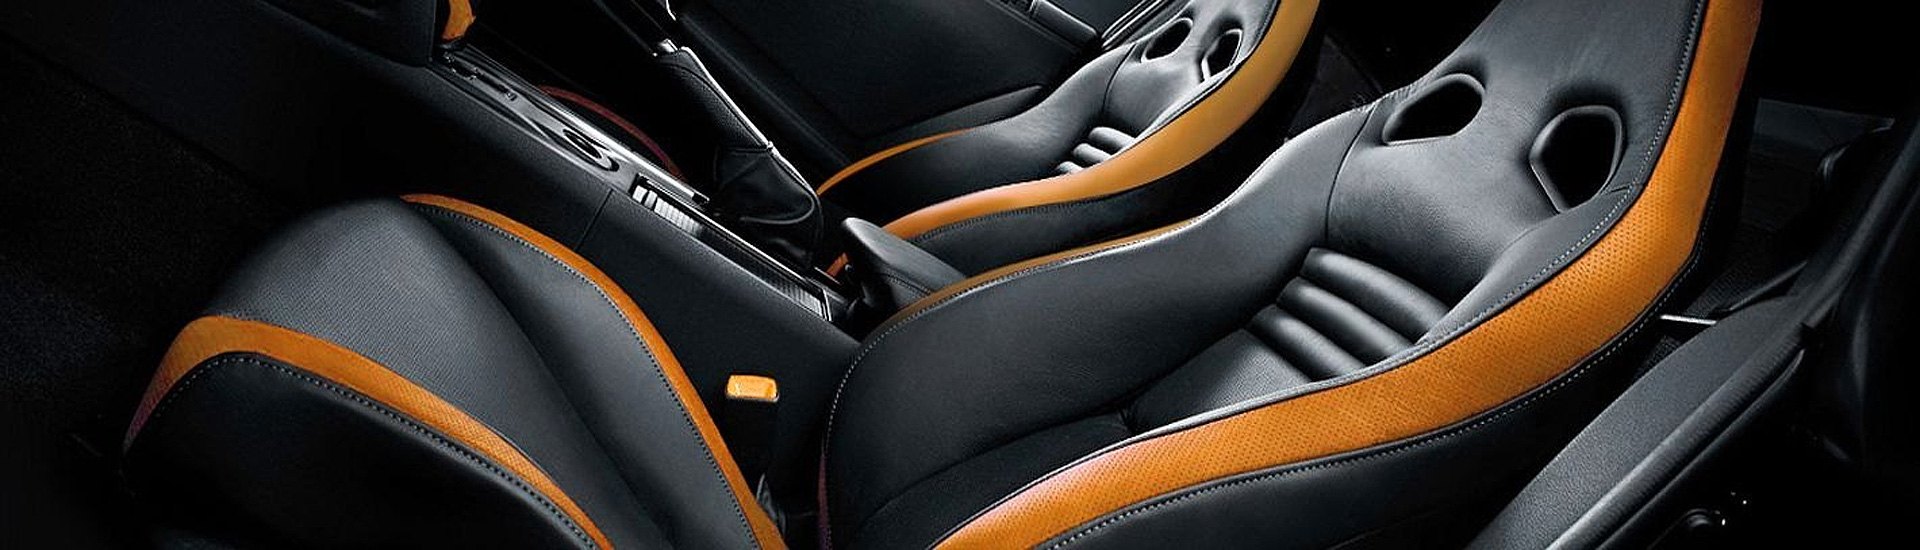 Racing And Performance Seats Add Safety And Comfort